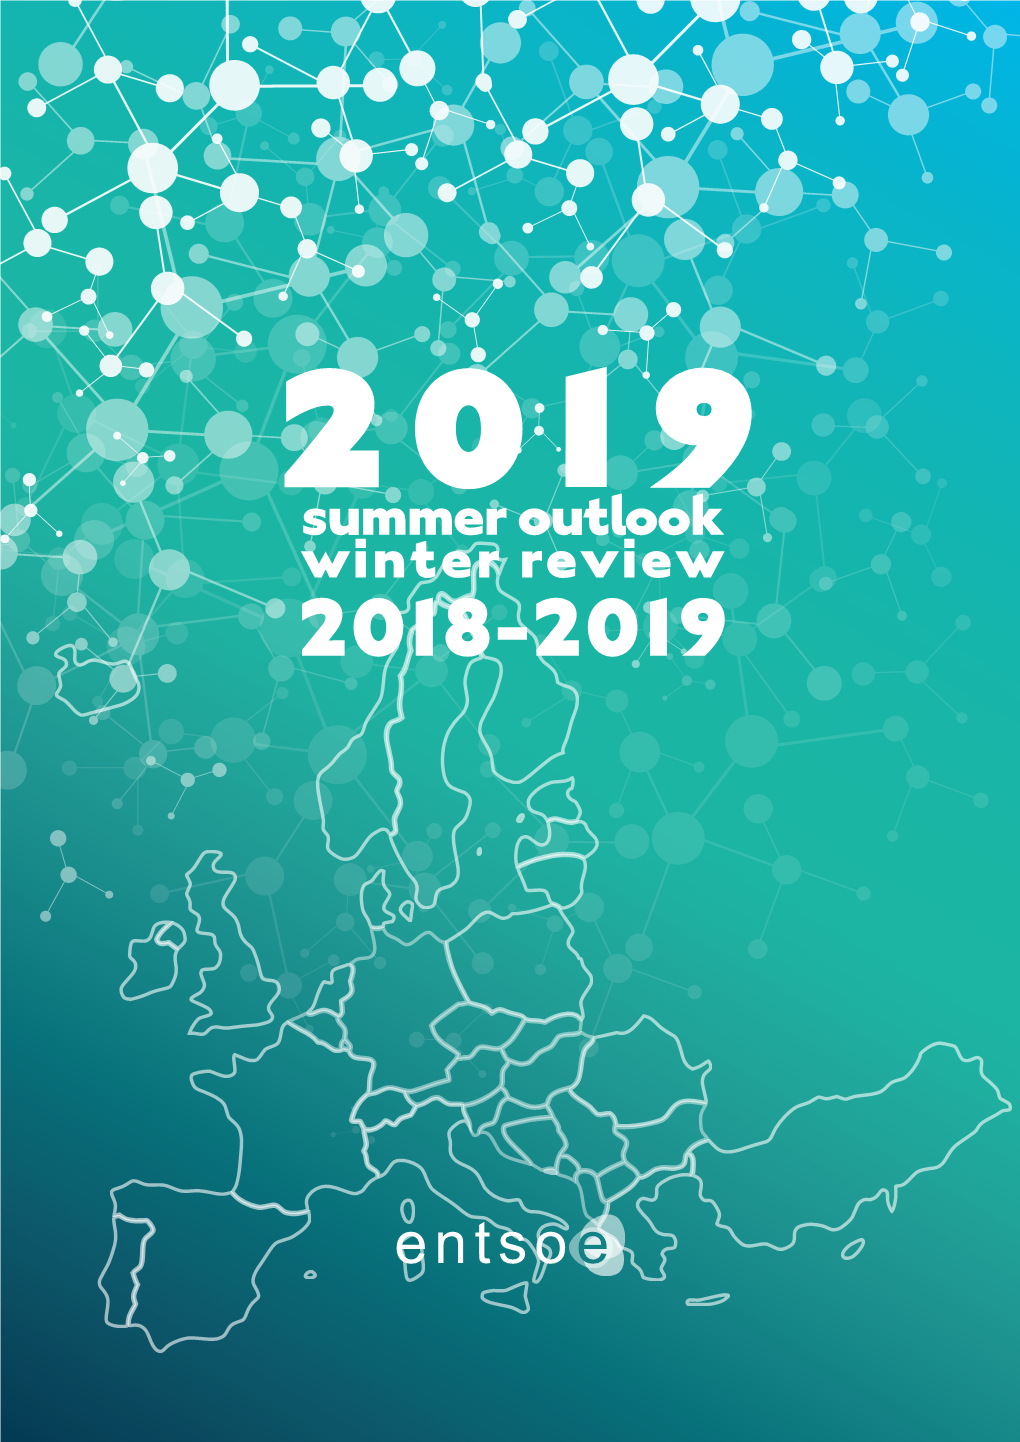 Summer Outlook Report 2019 and Winter Review